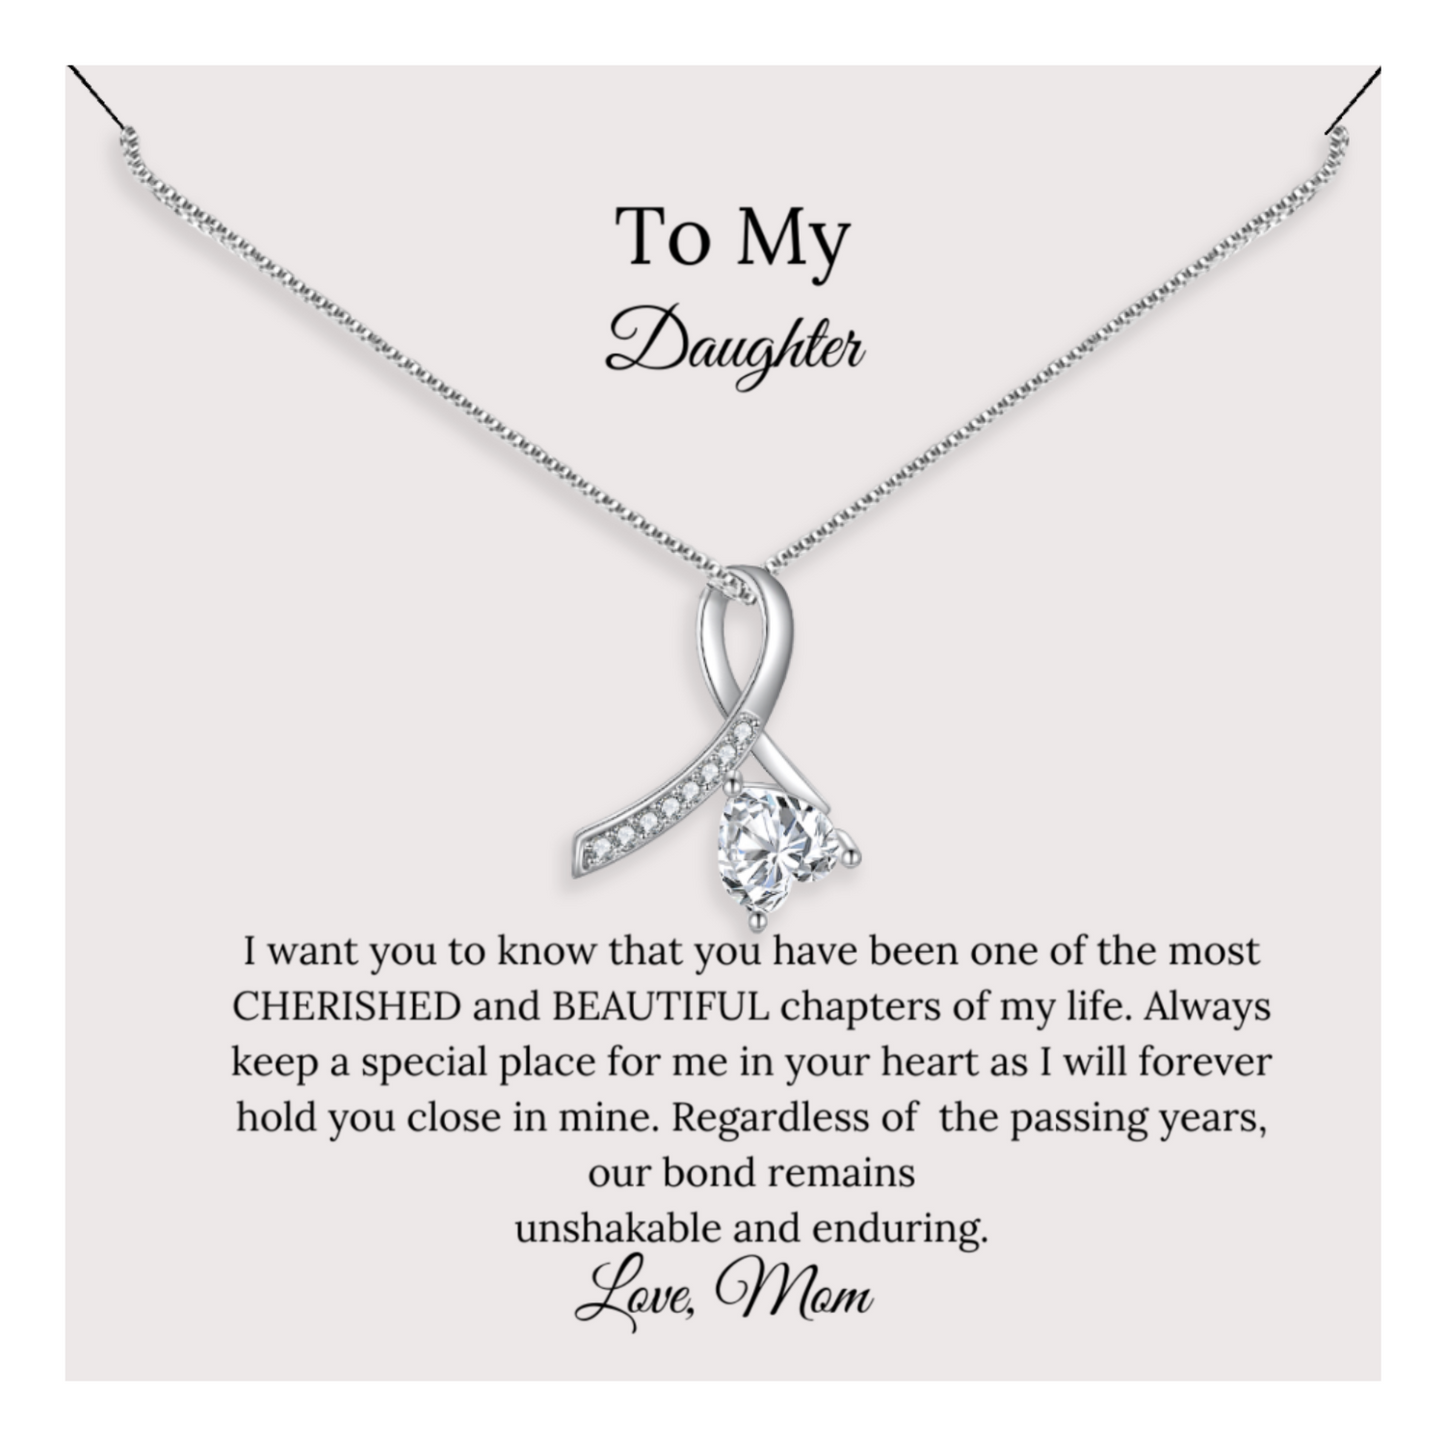 To My Daughter Necklace, Forever Love Necklace, Daughter Necklace, Daughter Gift From Mom - Mardonyx Jewelry Enchanting Ribbon